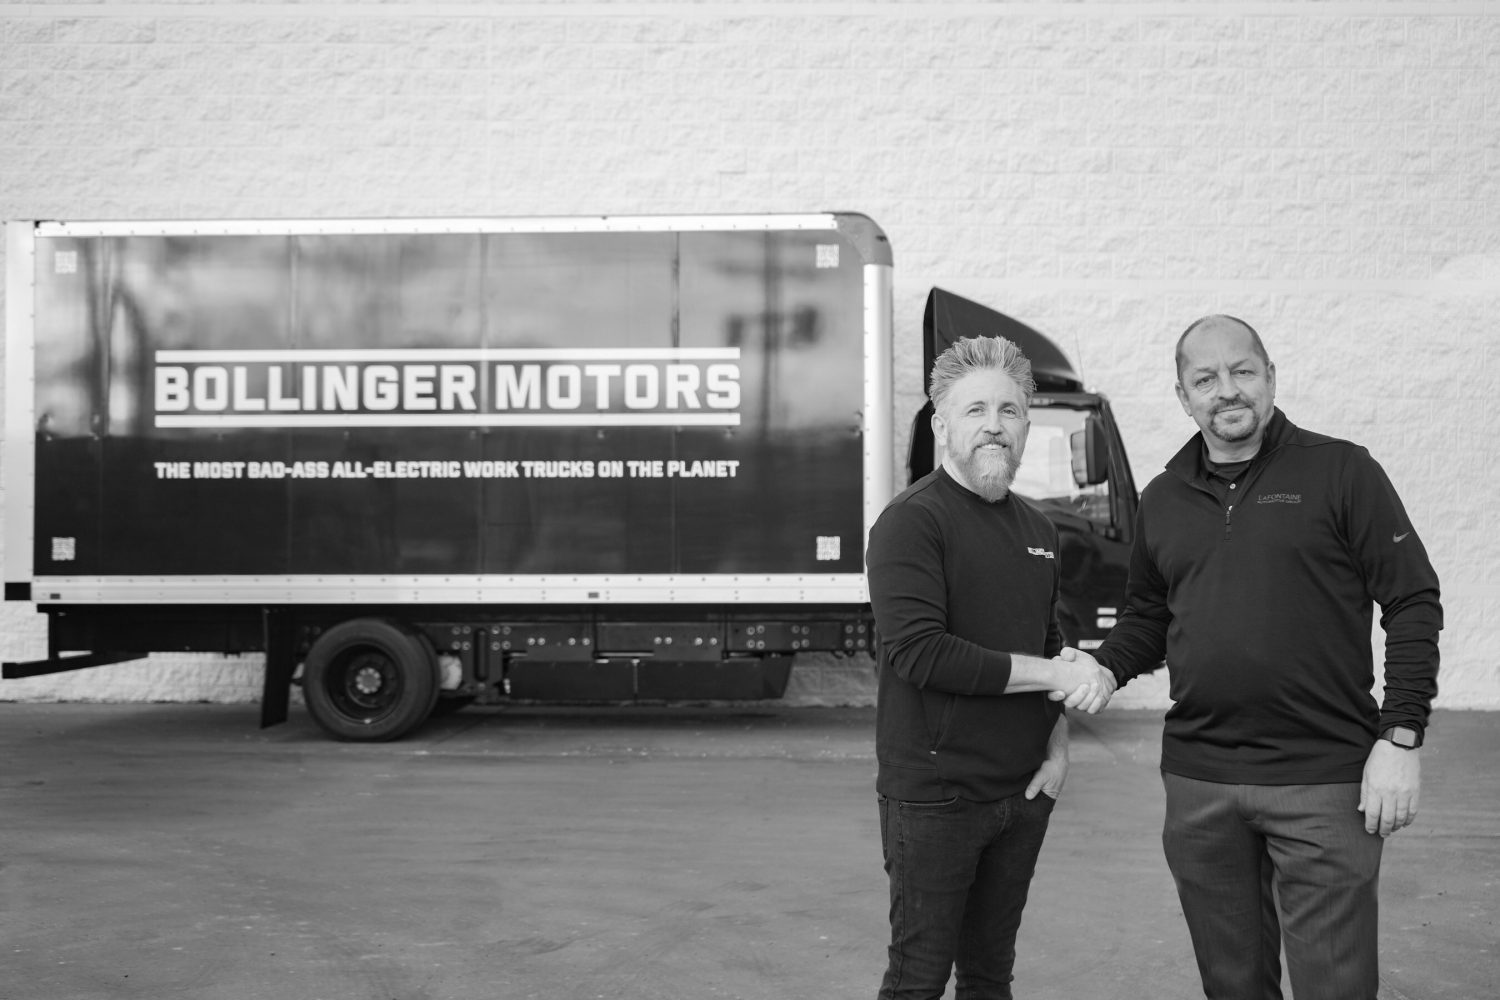 Up-and-coming electric vehicle manufacturer Bollinger Motors will its products through LaFontaine Automotive Group starting later this year.